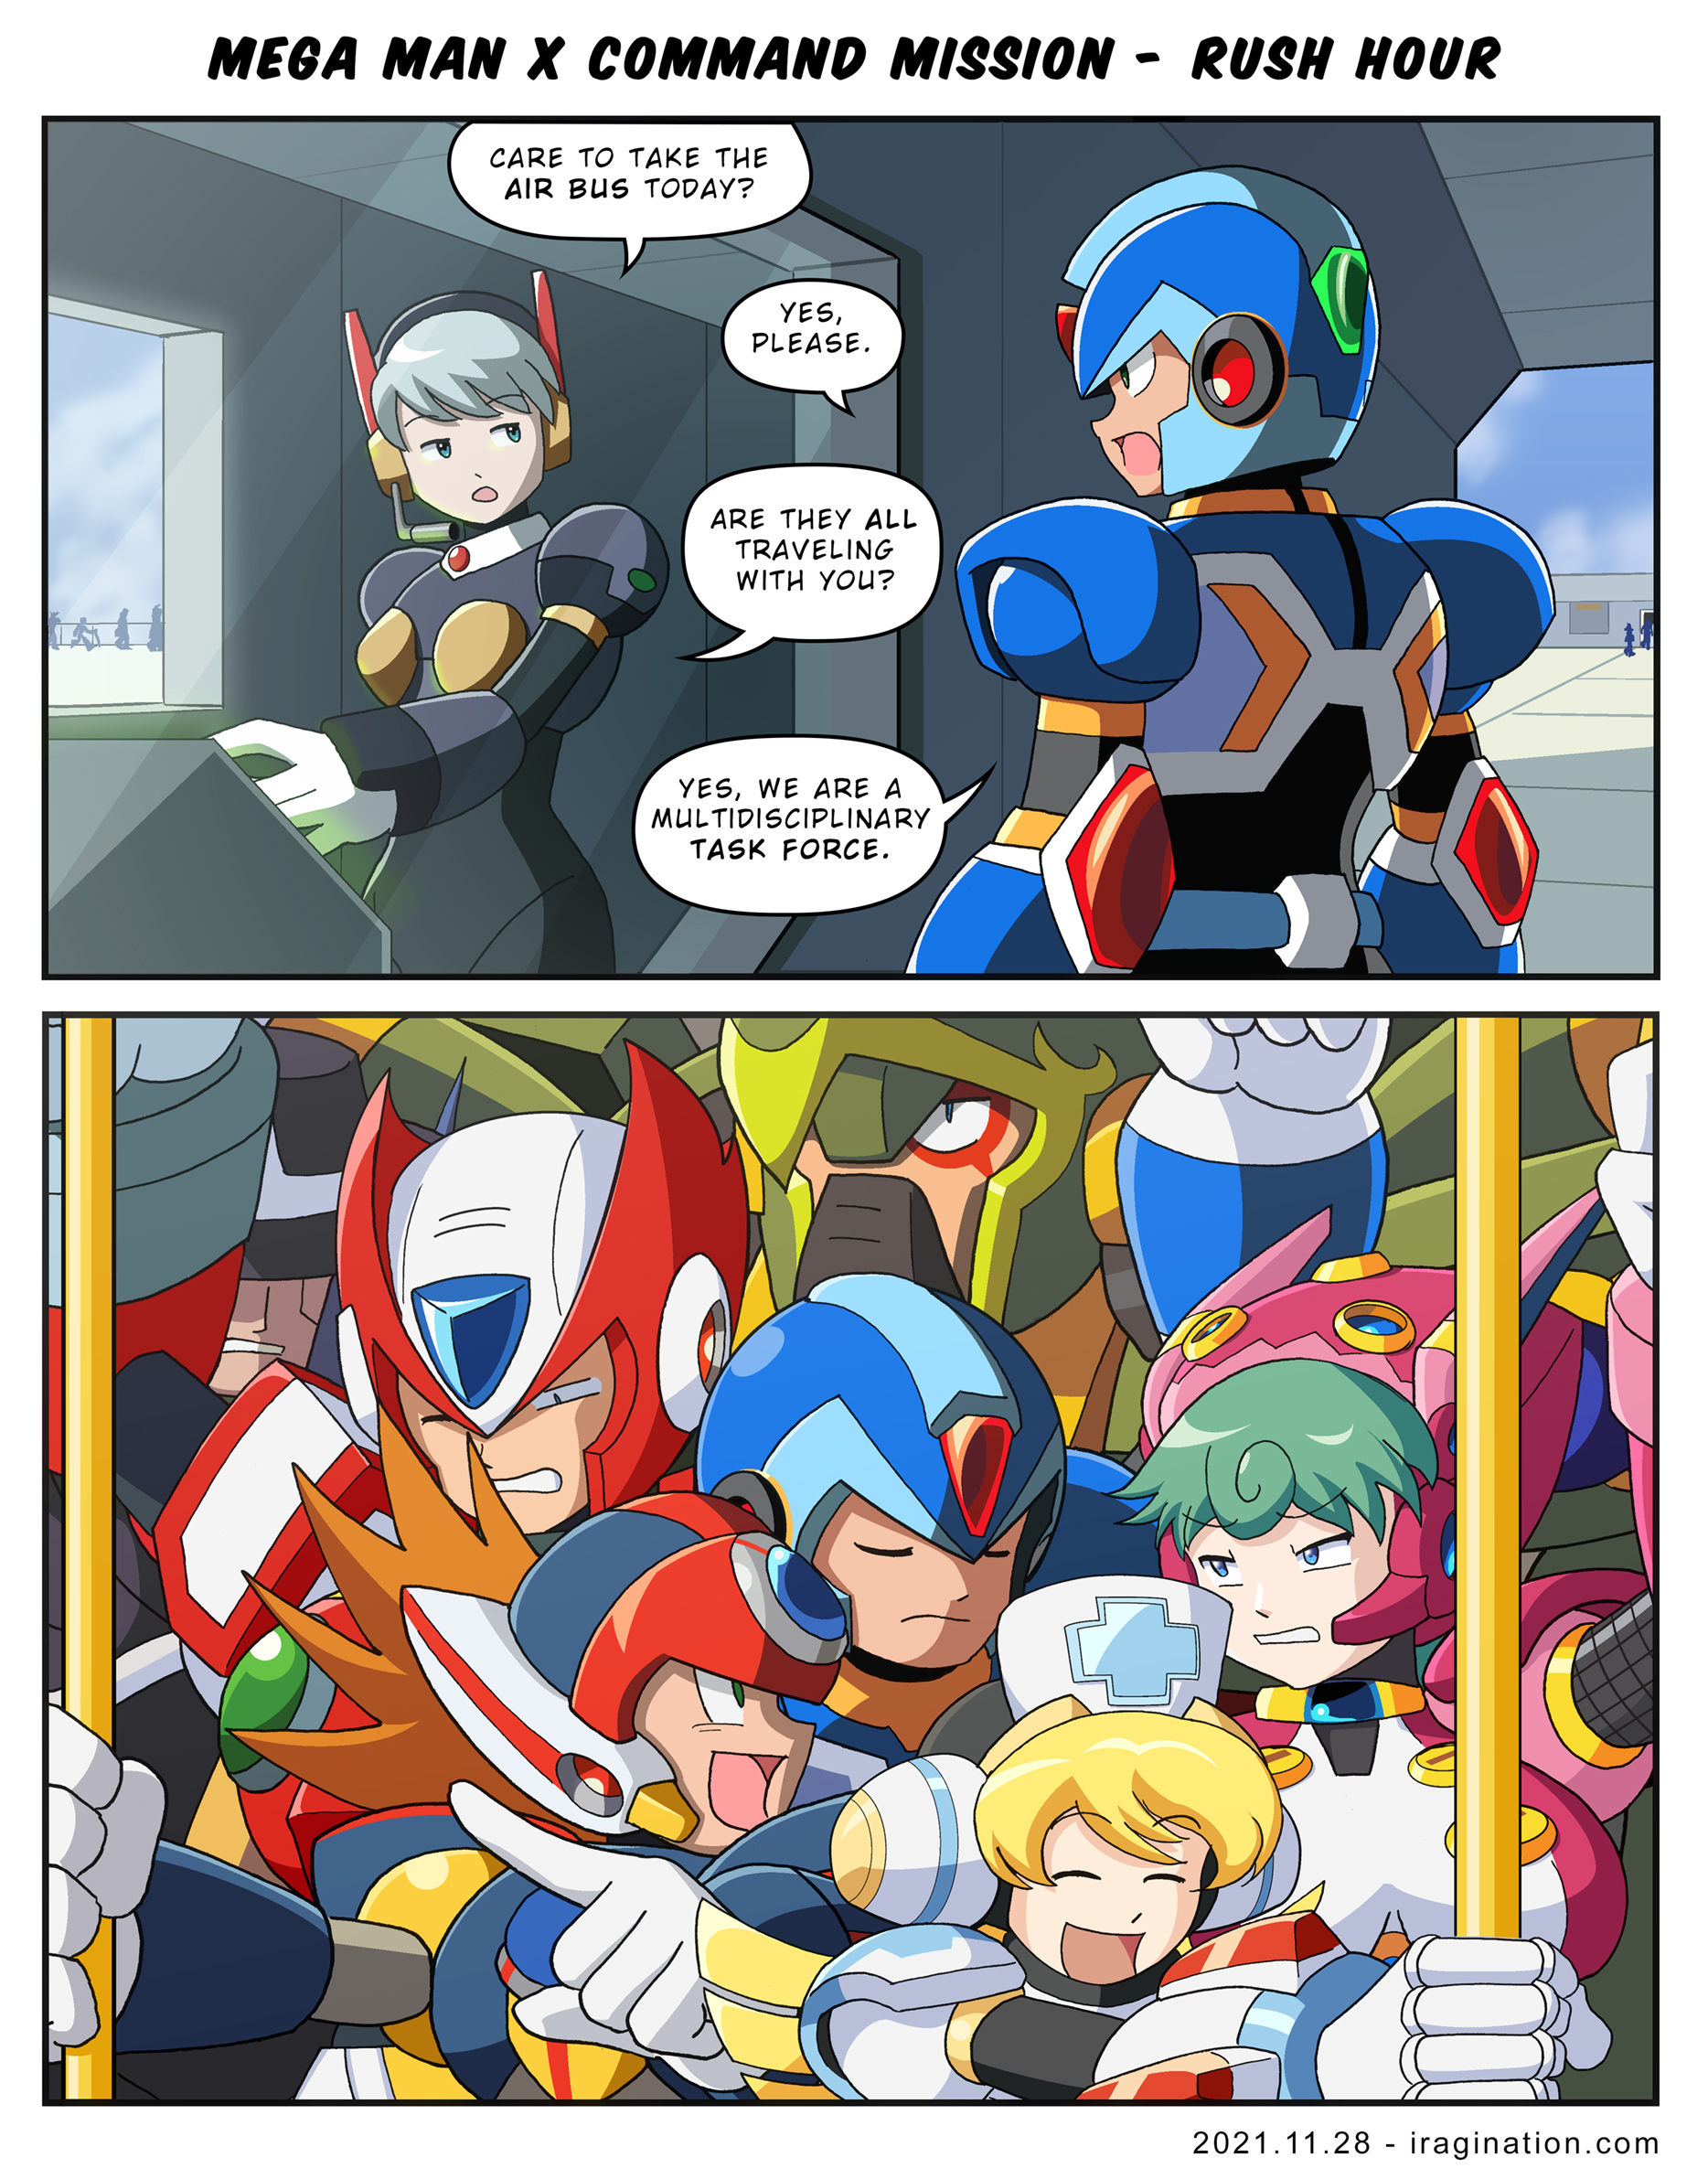 Mega Man X Command Mission: Rush Hour
I found it interesting that during the events of Mega Man X Command Mission, the protagonists had to rely on public transportation to get to some places. I wondered how this worked with such a large group in a crowded bus. 

During this game sequence, X is always shown embarking alone, which we can assume is just a storytelling device used by the developers. Later, the other party members casually pop up next to him when the story needs them. 

Or perhaps the team just let X travel alone and use a ride-sharing app to meet with him at the destination.

On a related note, remember to send your request for the [b]Air Bus Staffer[/b] for Rockman X DiVE!
Keywords: x air-bus-staffer marino cinnamon axl zero spider massimo